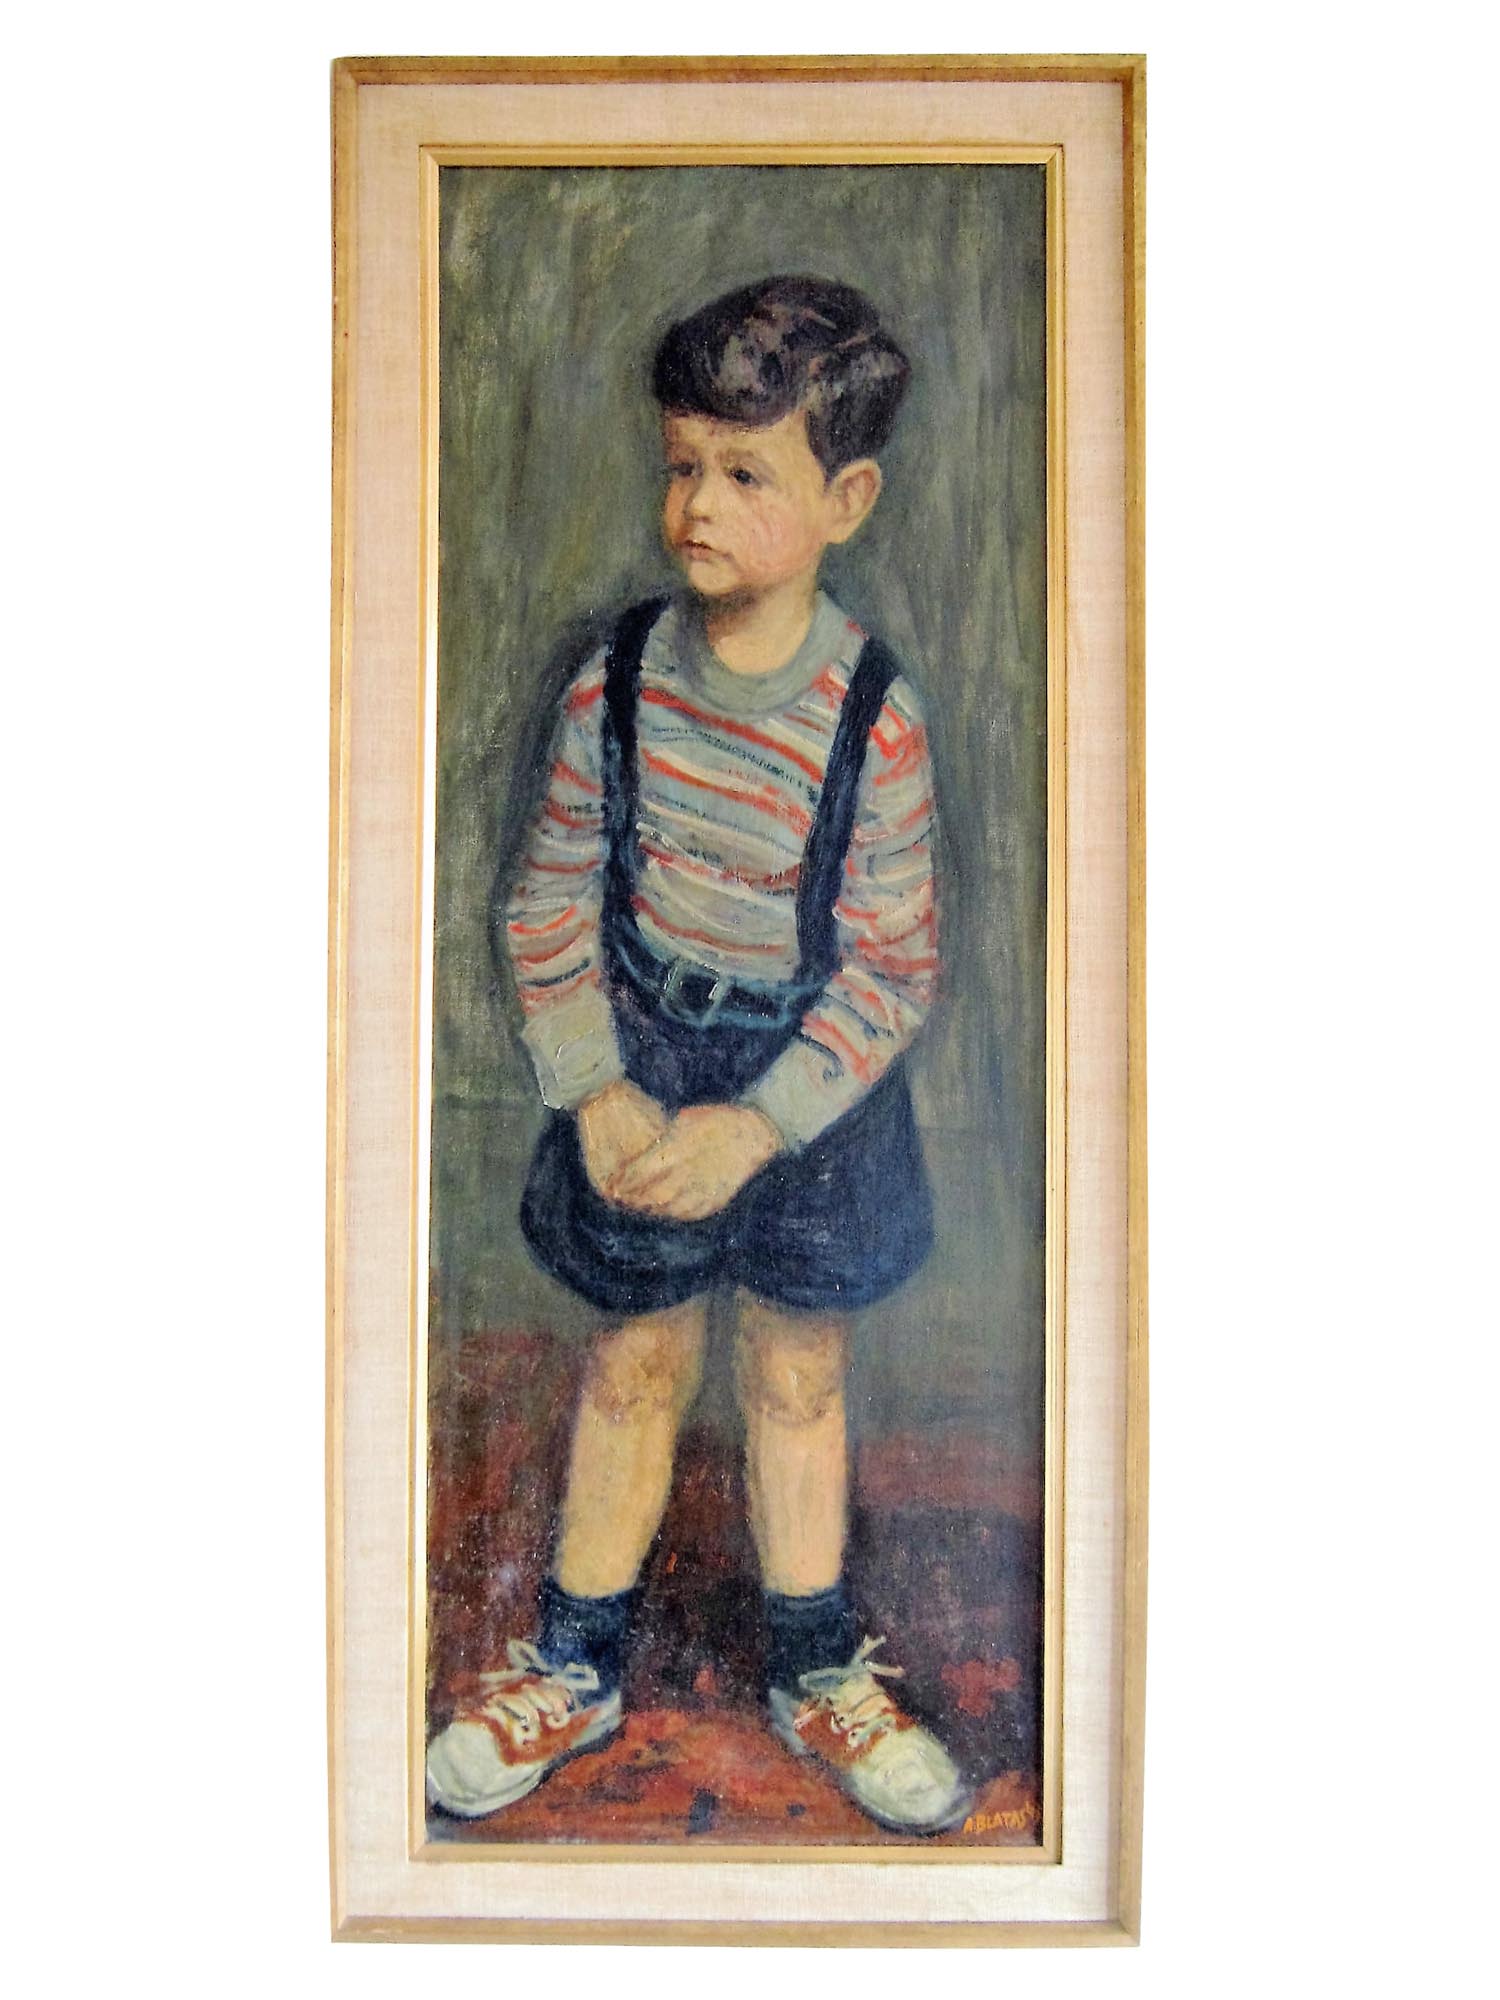 ARBIT BLATAS LITHUANIAN OIL PAINTING OF A BOY 1943 PIC-0